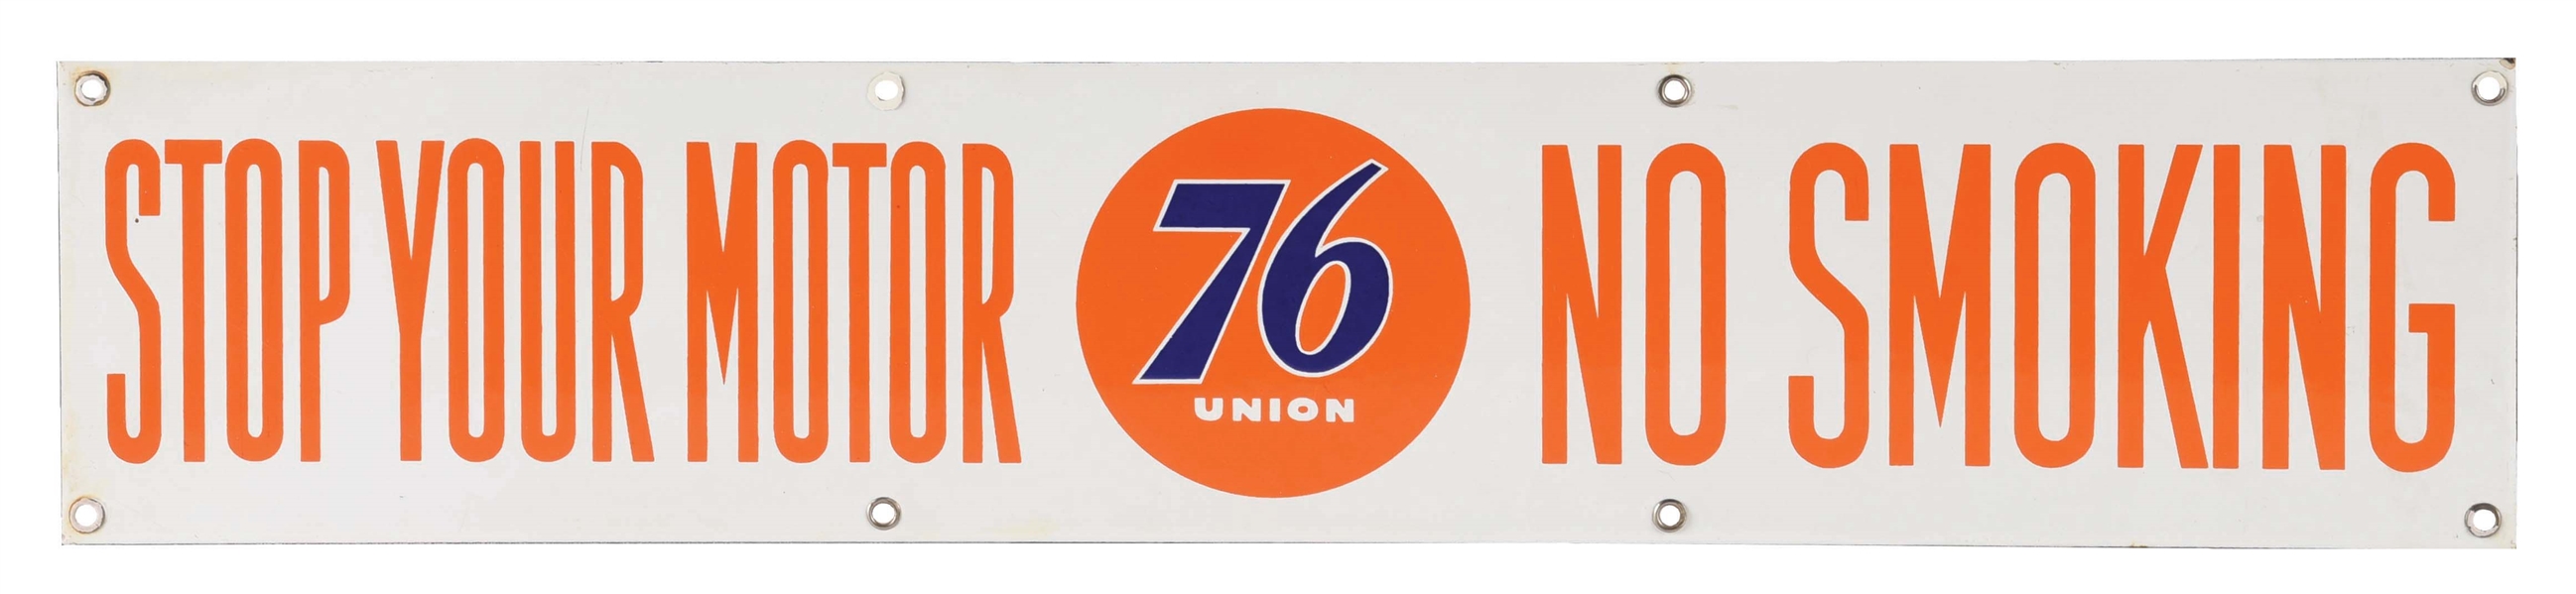 UNION 76 STOP YOUR MOTOR NO SMOKING PORCELAIN SIGN. 